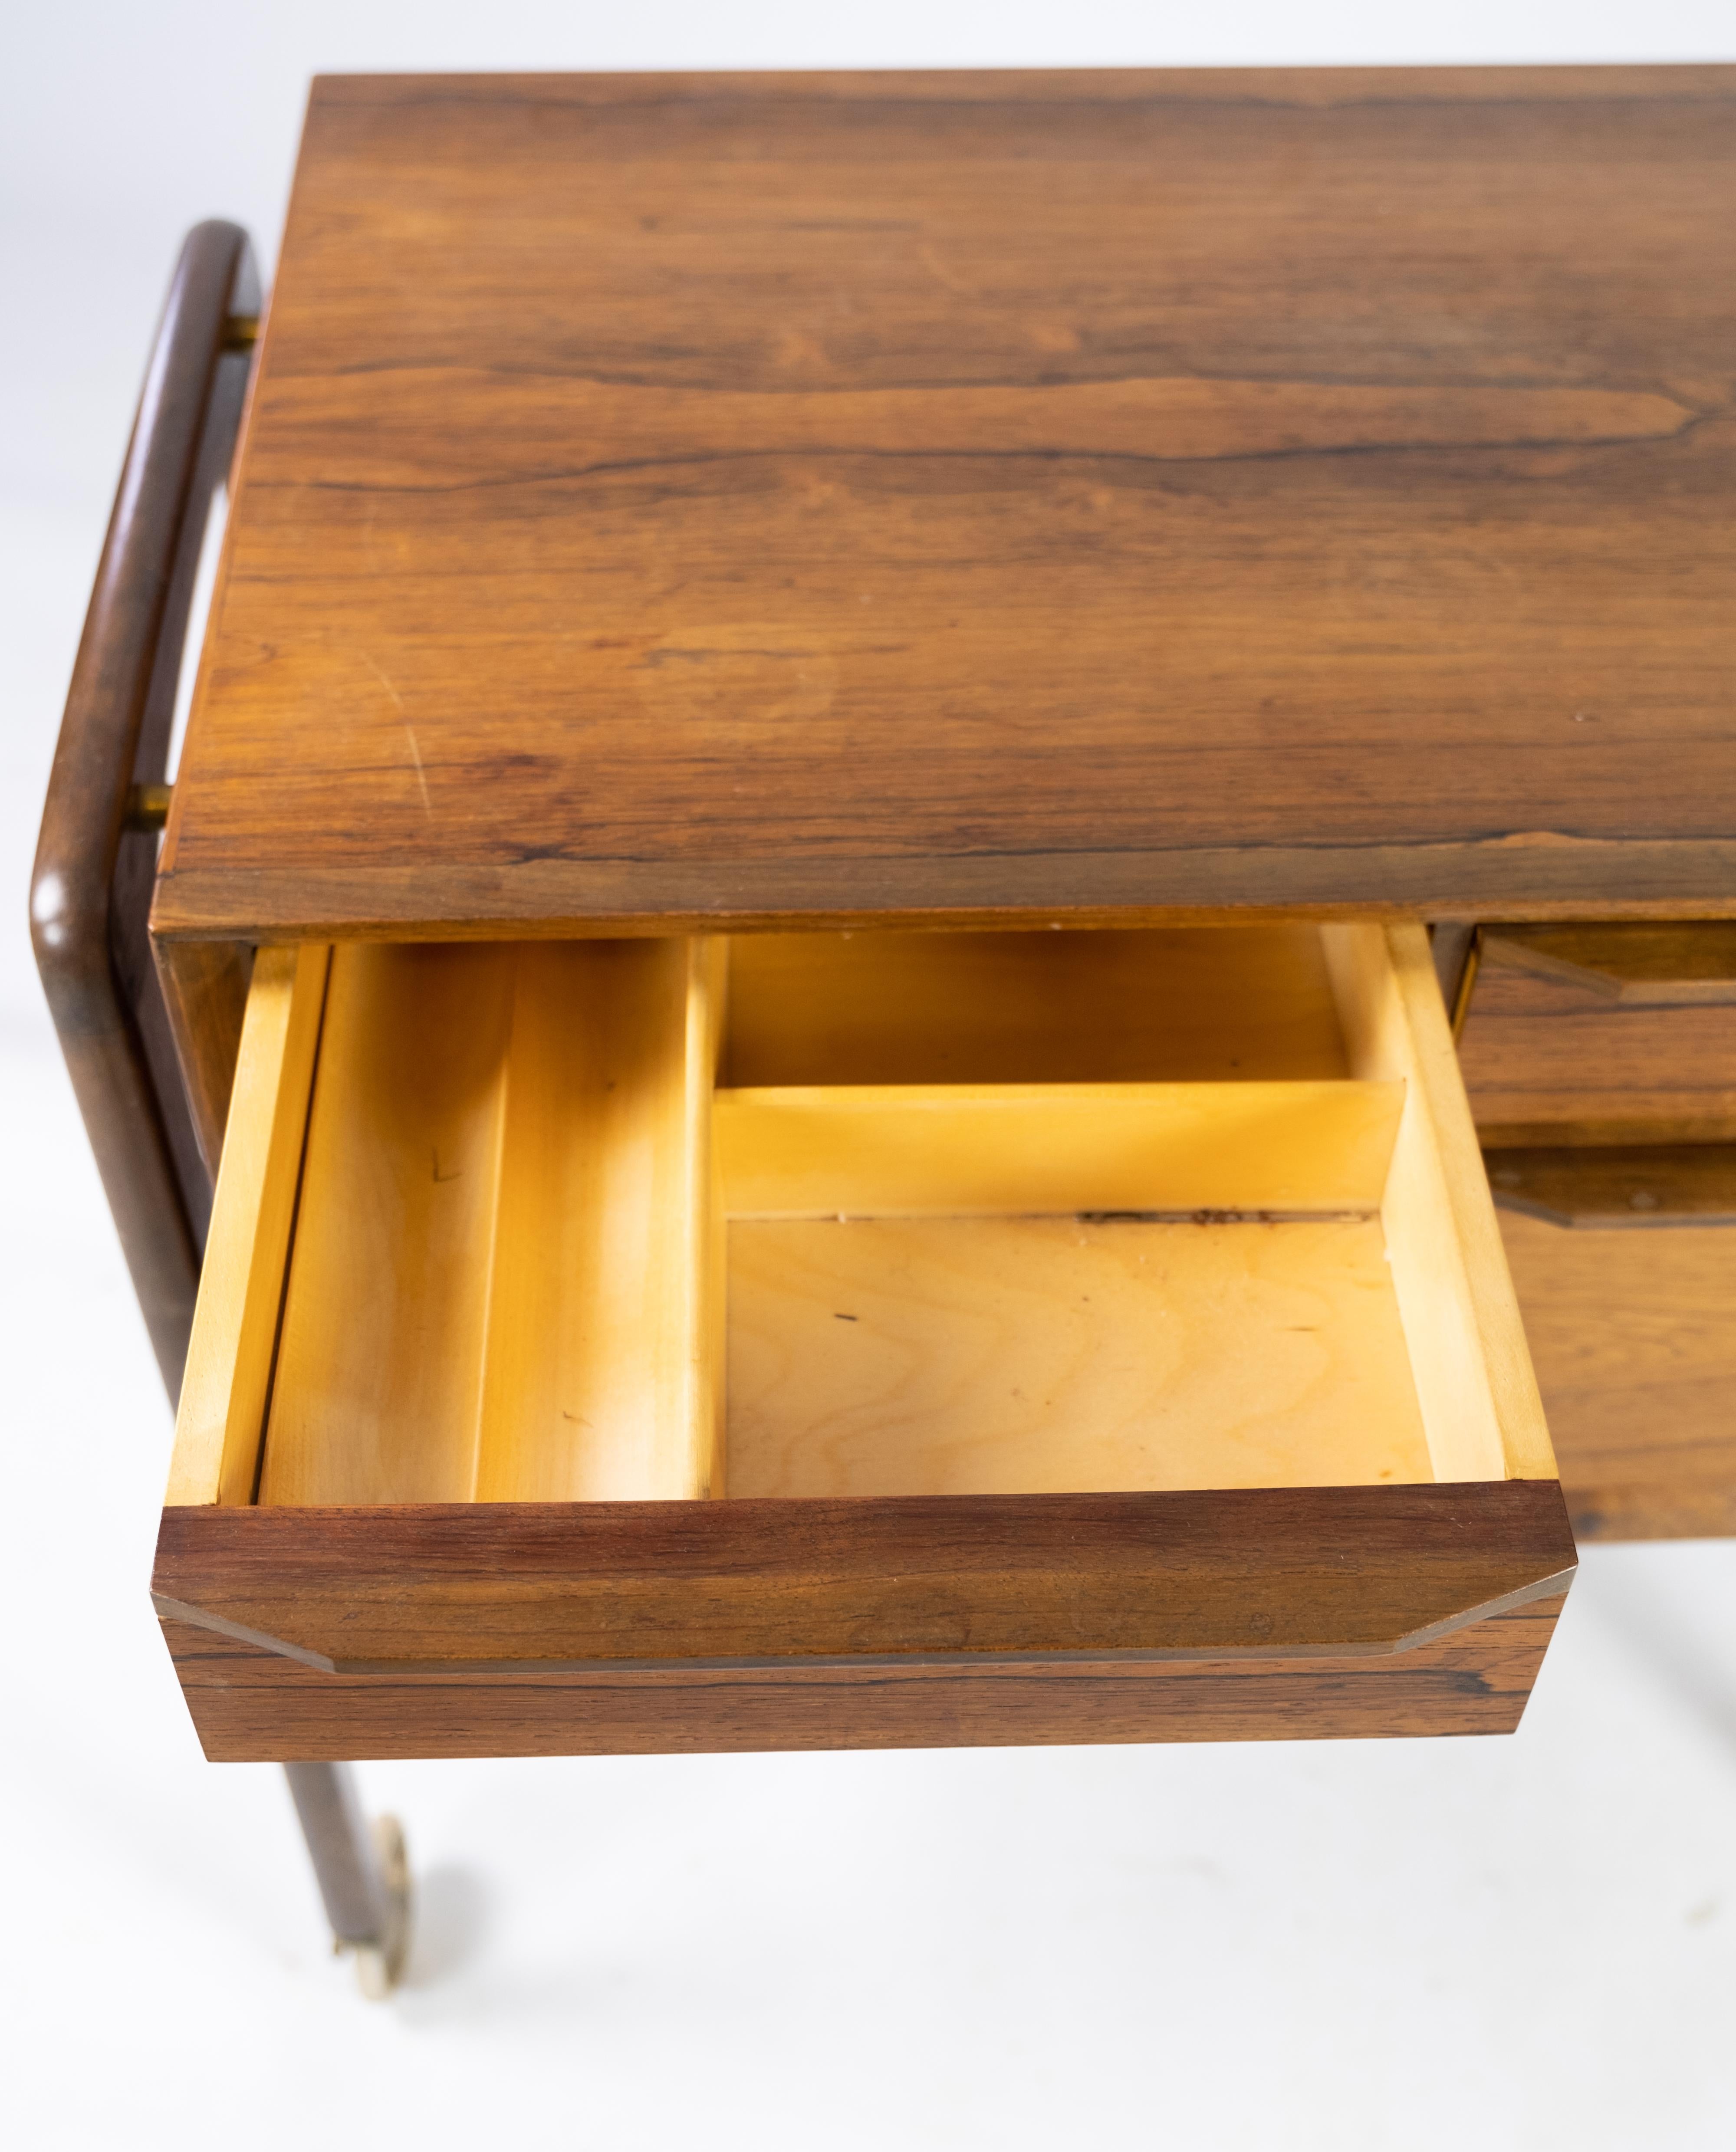 Small Chest of Drawers on Wheels in Rosewood of Danish Design from the 1960s For Sale 6